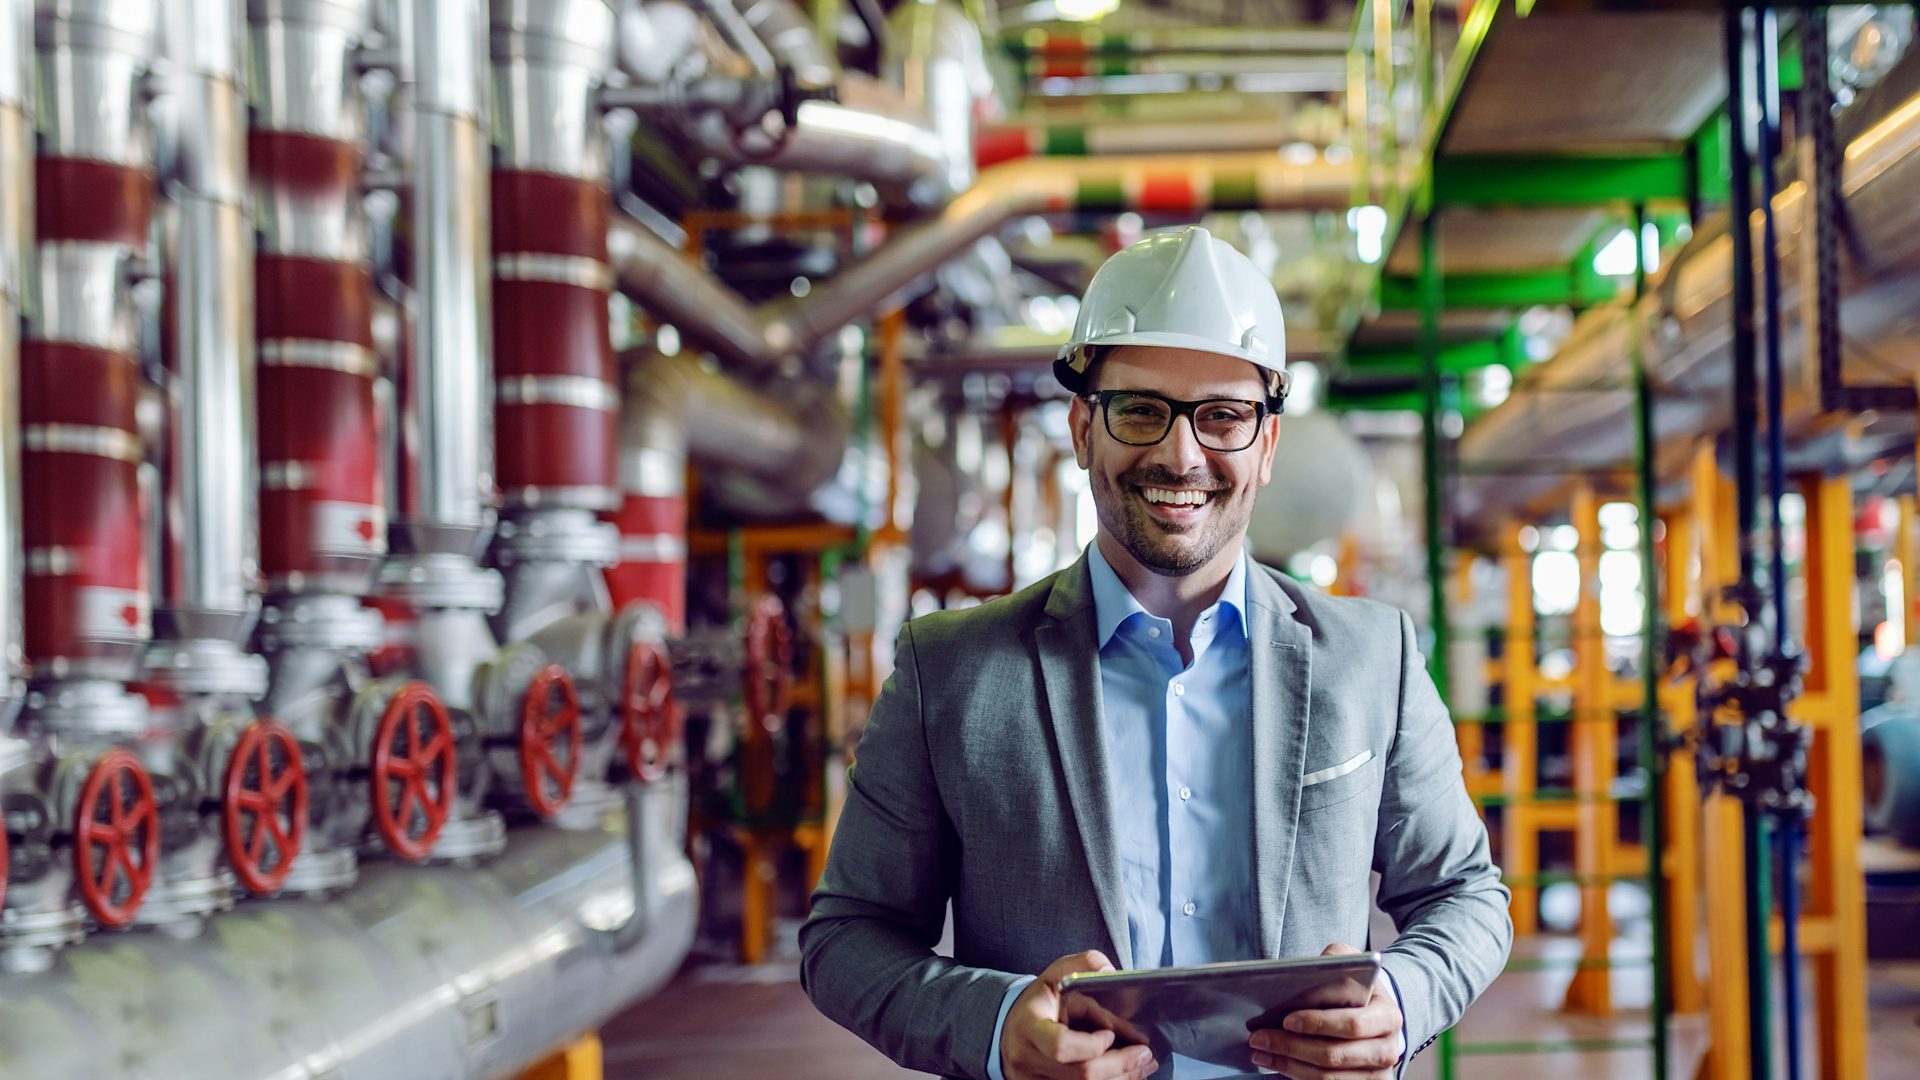 Man in a business suit wearing a hard hat smiling and standing in front of factory pipes.